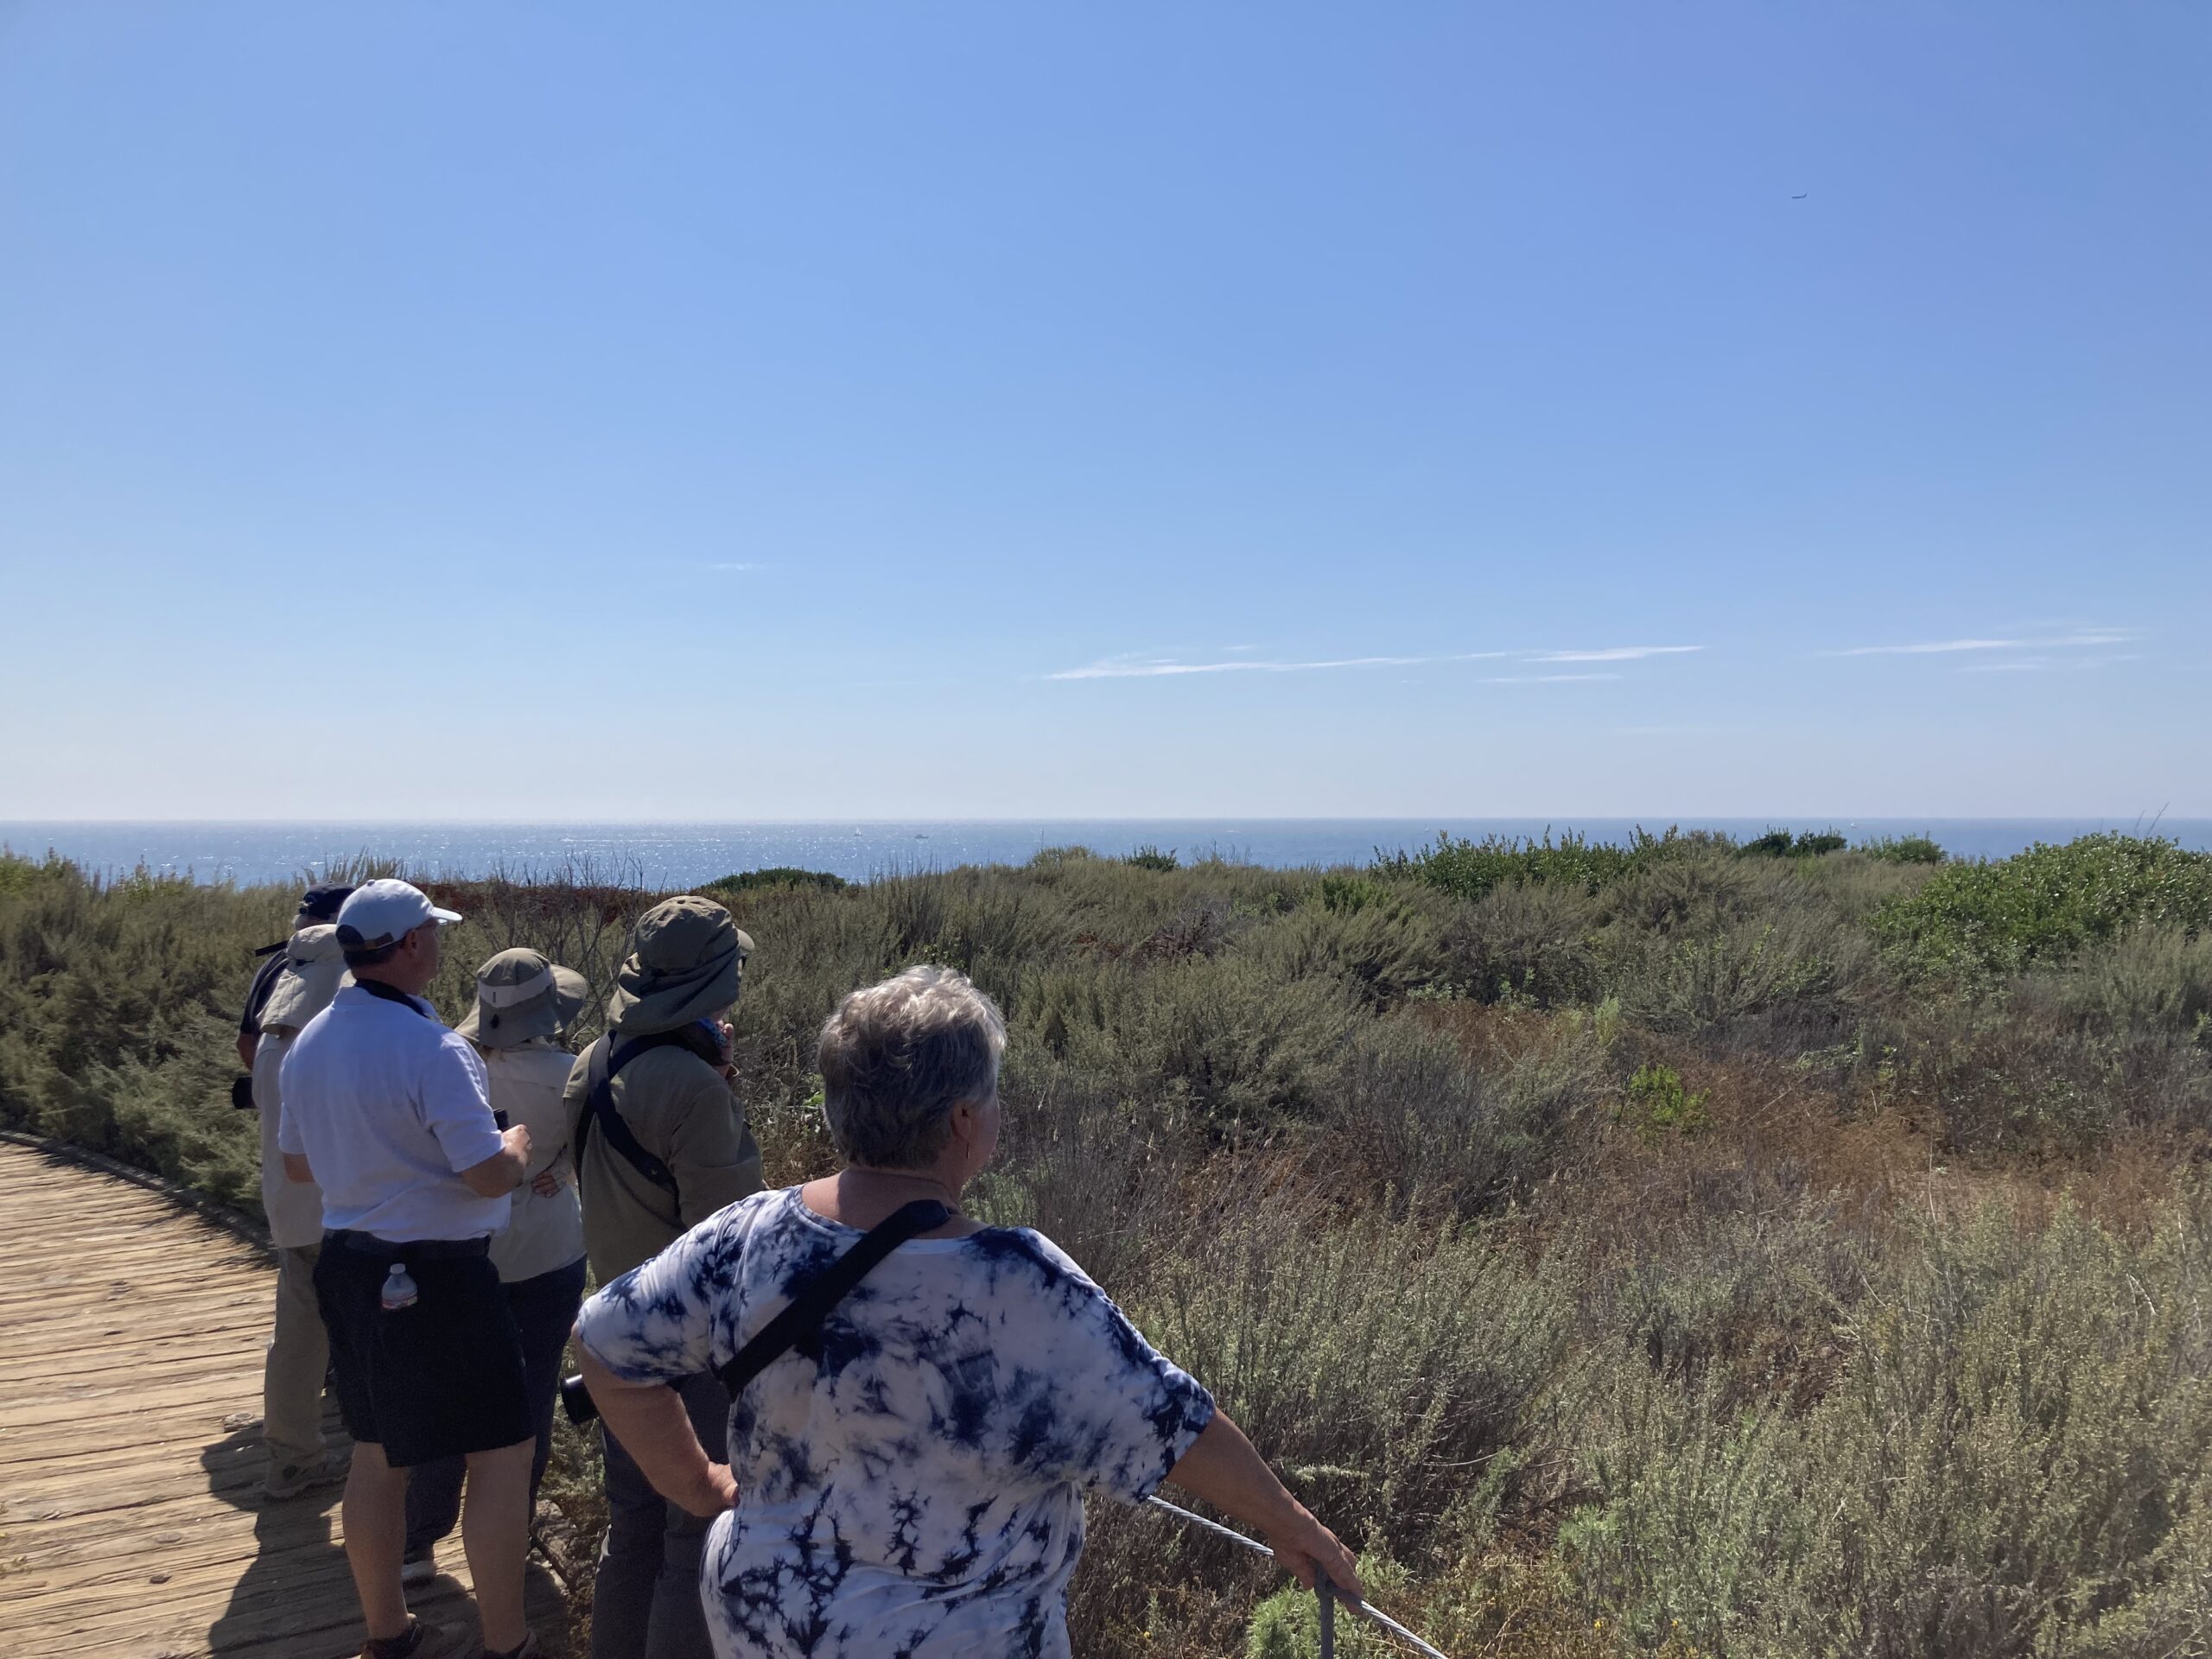 The group looks for California Gnatcatcher at Crystal Cove State Beach